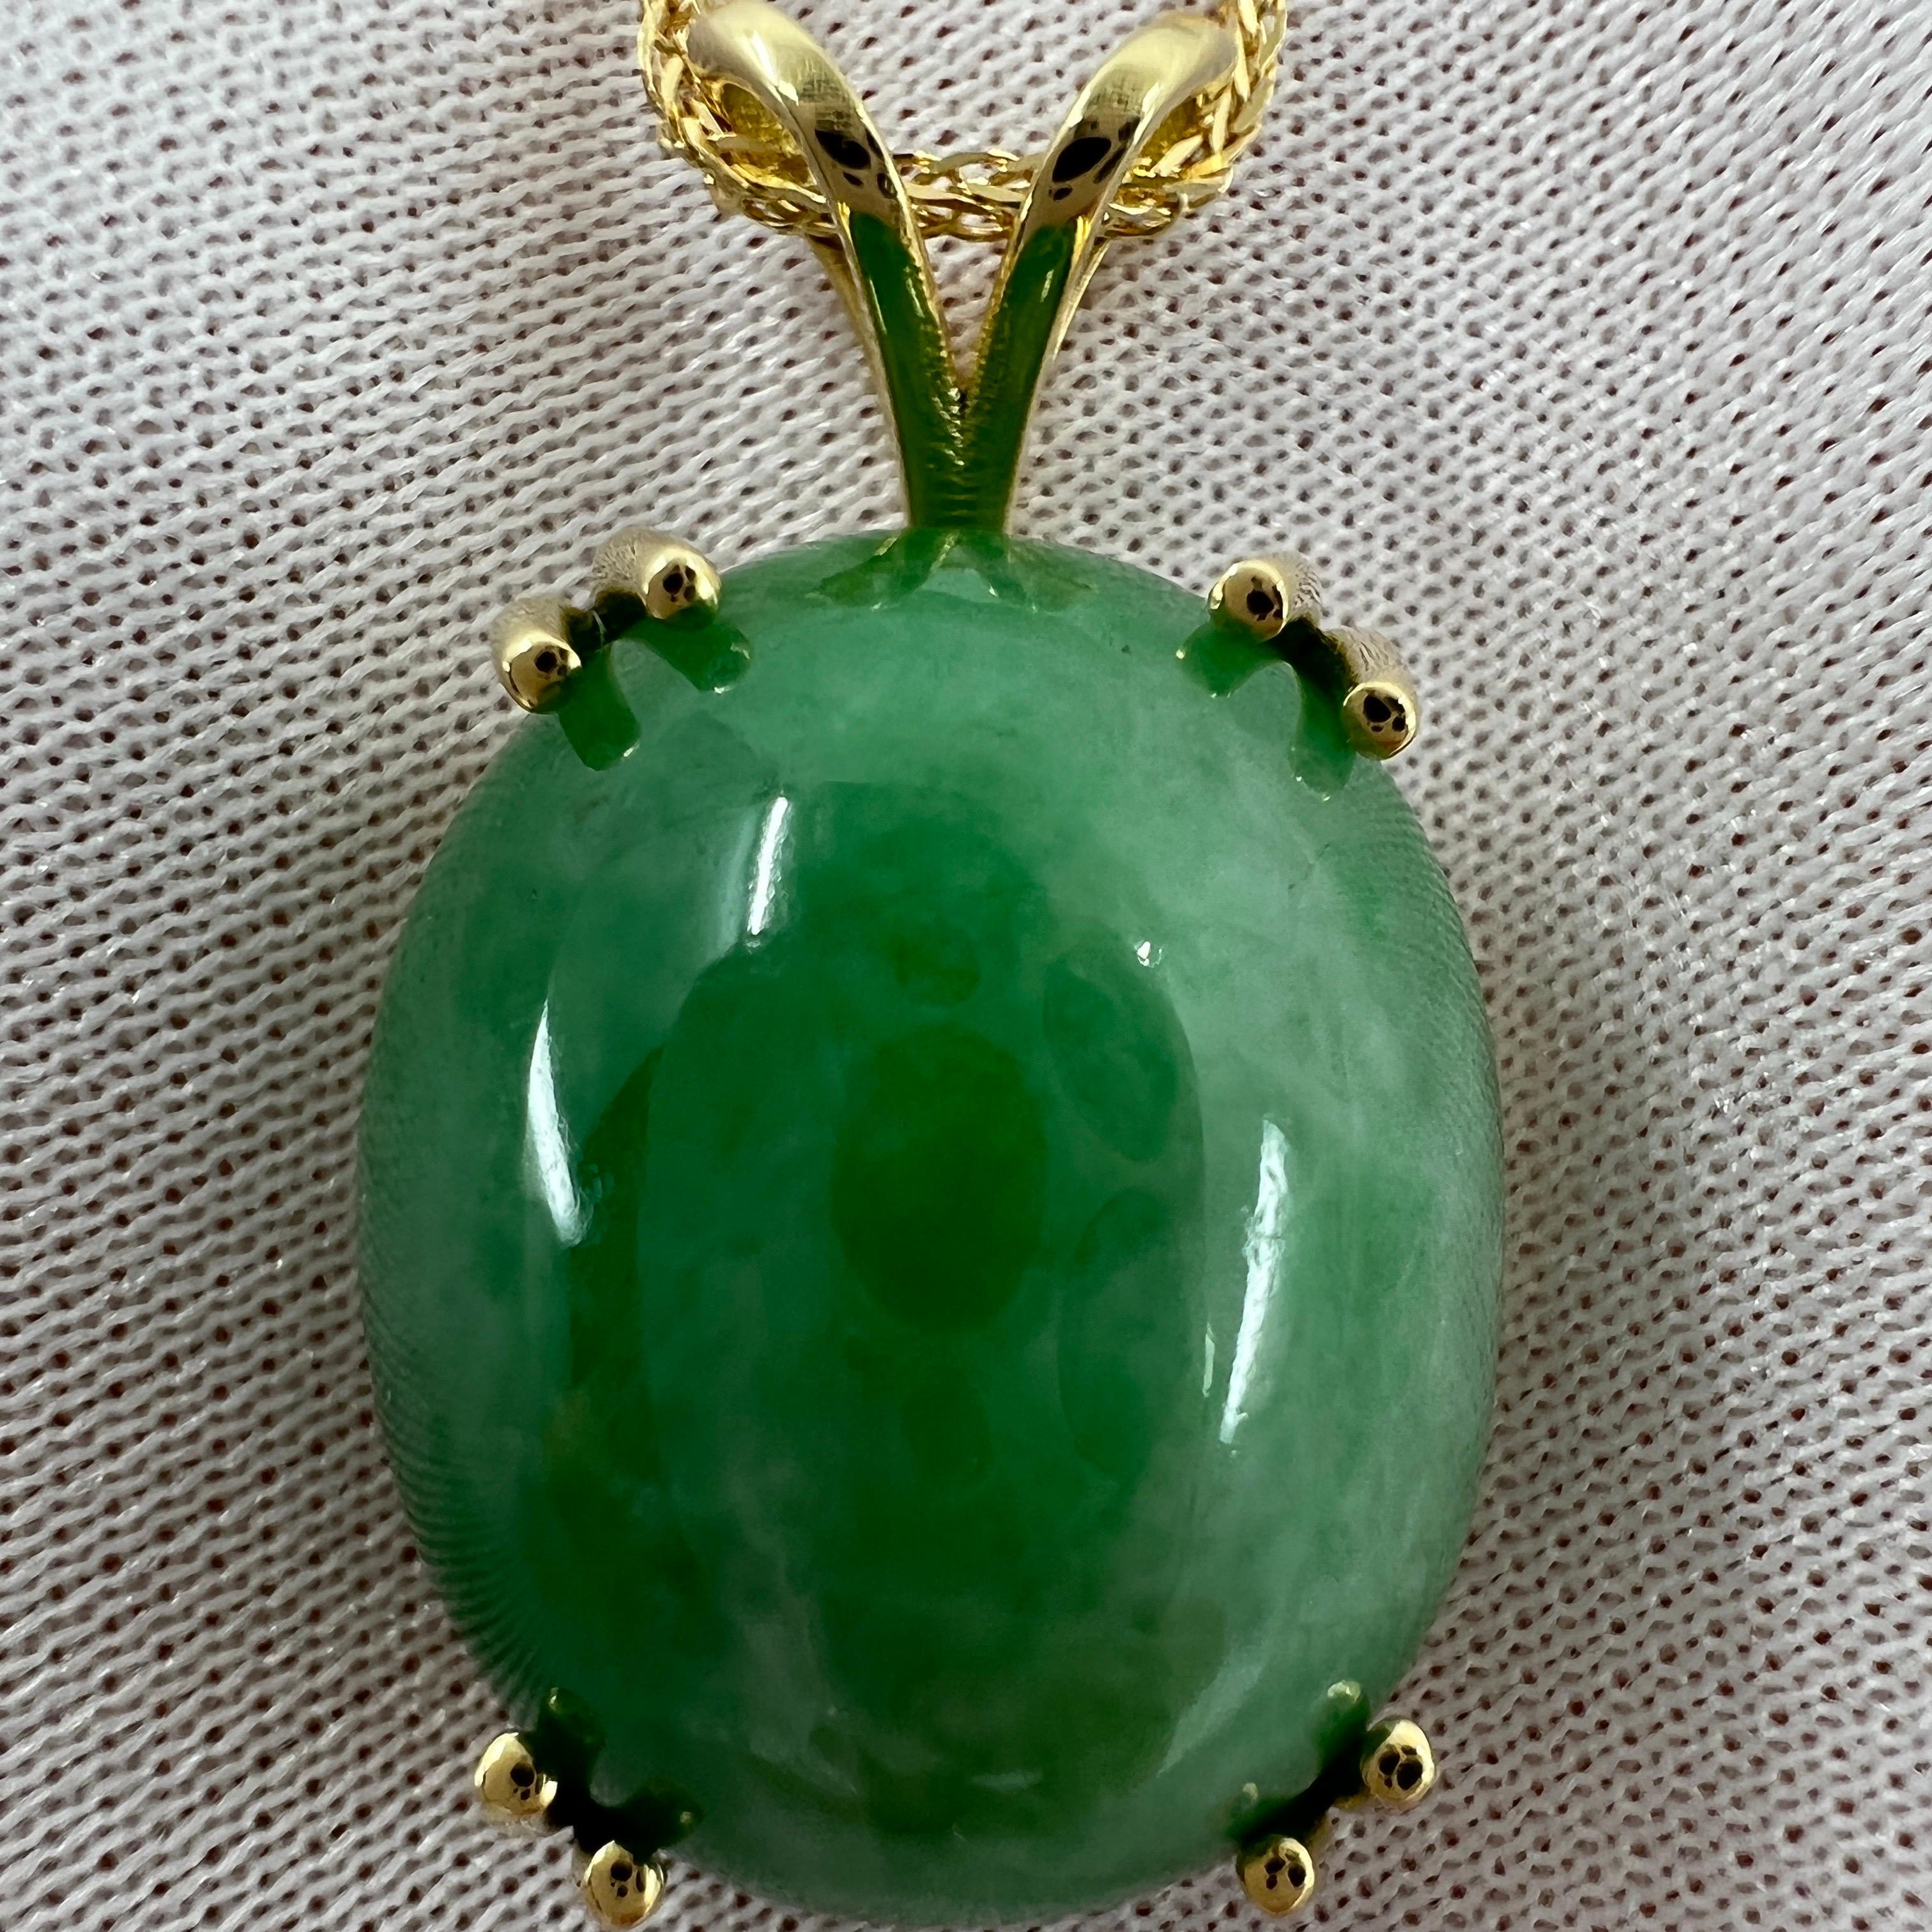 Rare GIA Certified Untreated Jadeite Jade A-Grade Green Pendant Necklace.

Huge 35.69 carat beautiful untreated jadeite stone with a mottled green colour and very good oval cabochon cut. 

Incredibly rare large size jadeite stone. A single cabochon